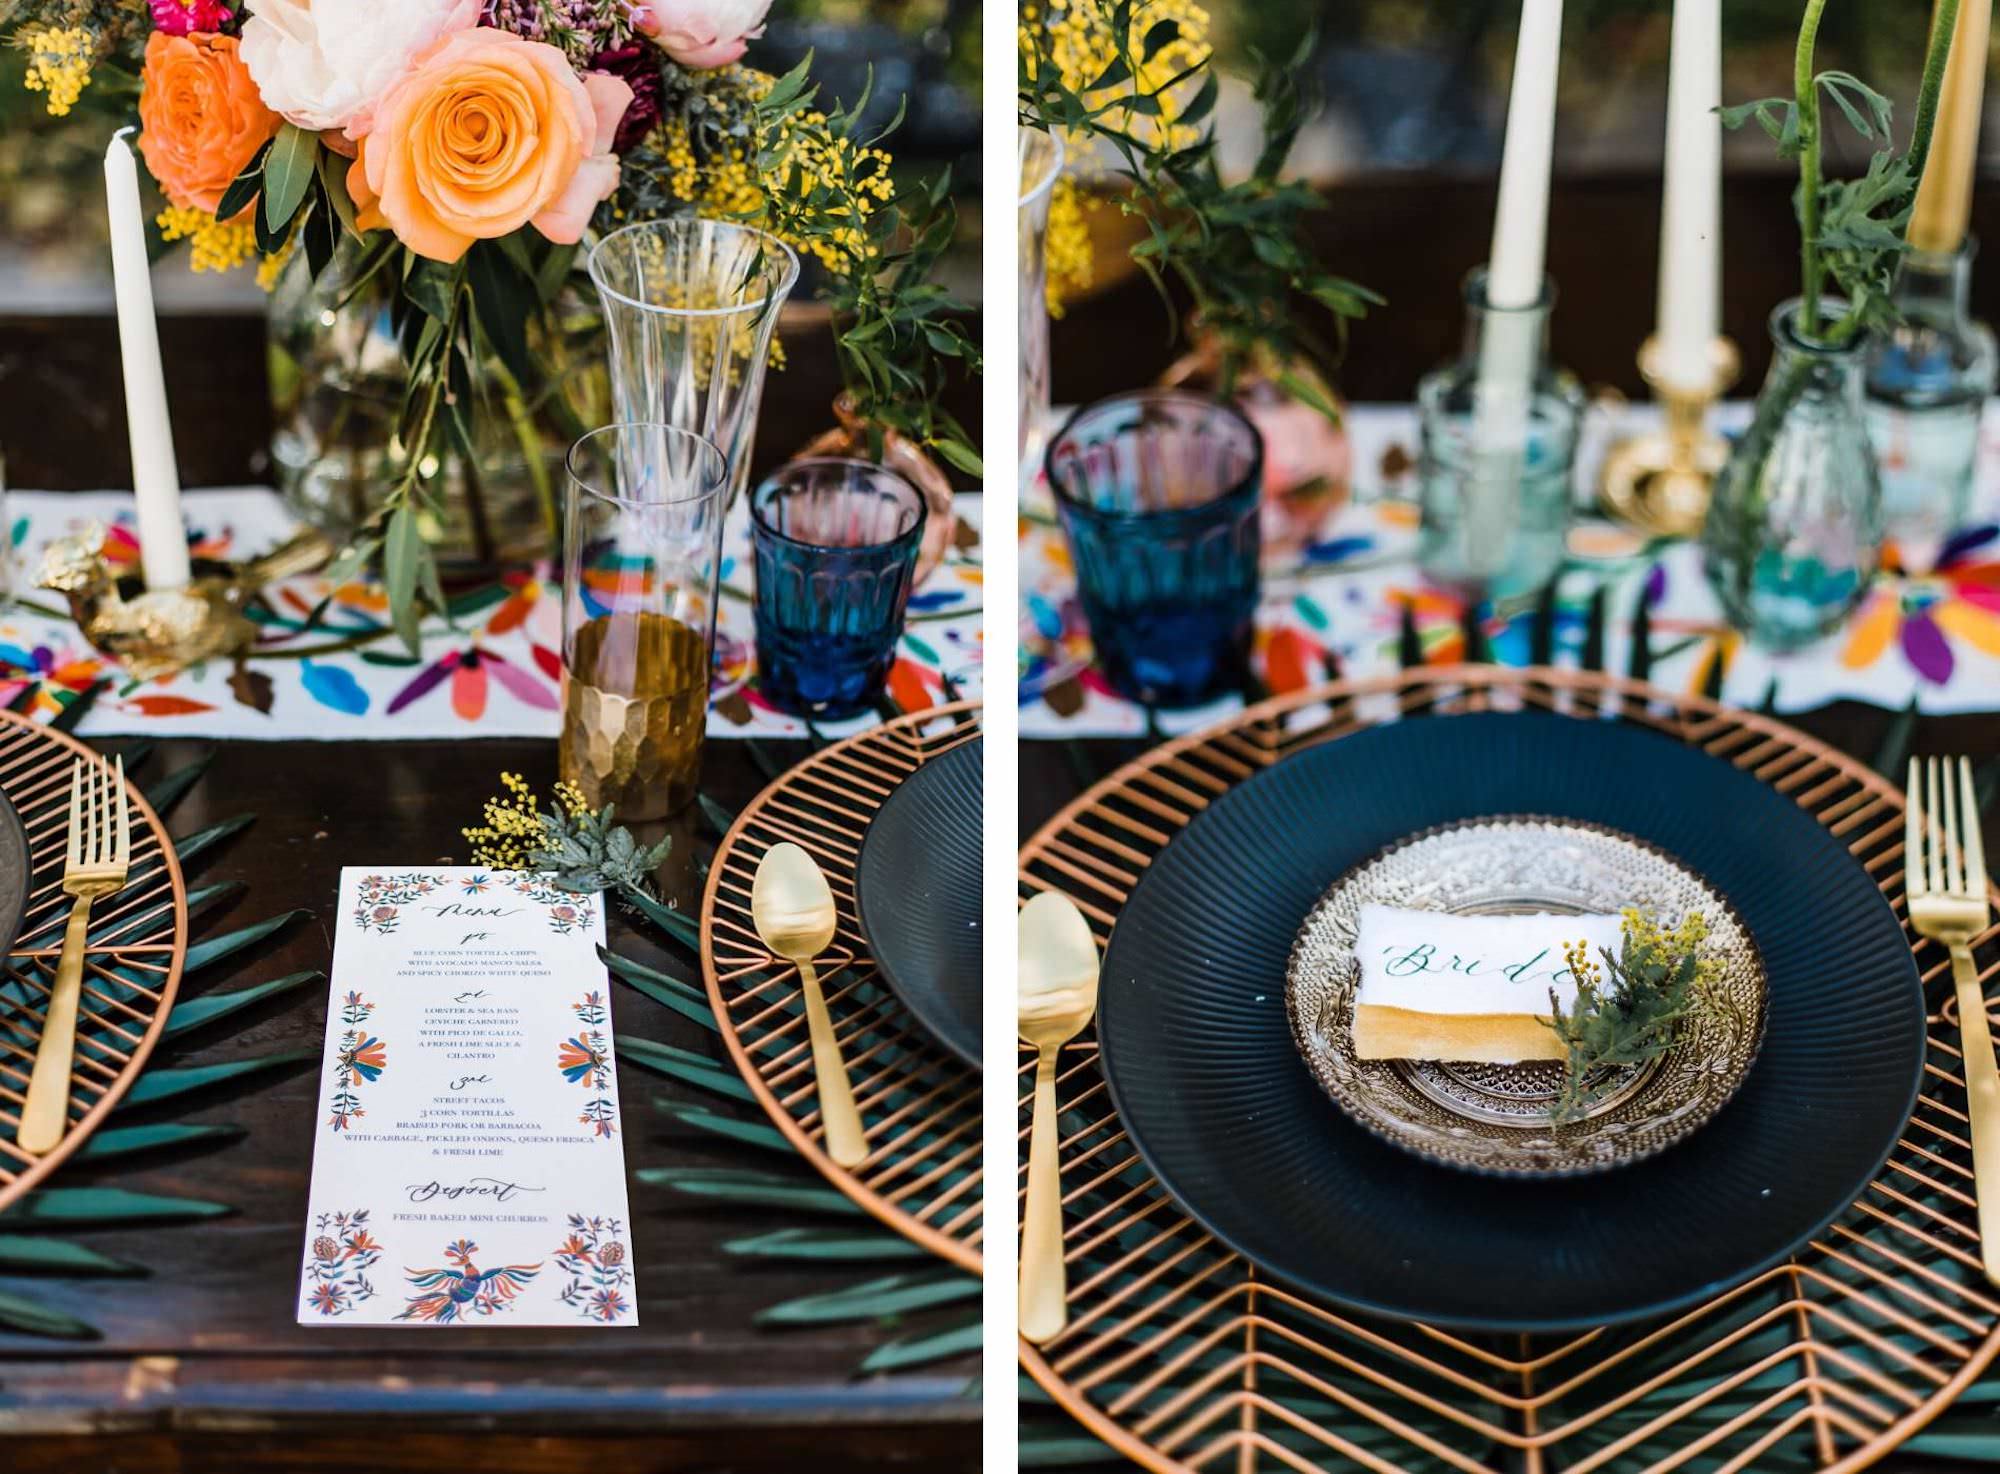 Mexican Inspired Wedding Reception Decor with Modern Geometric Plate Charger with Whimsical Accent Decor